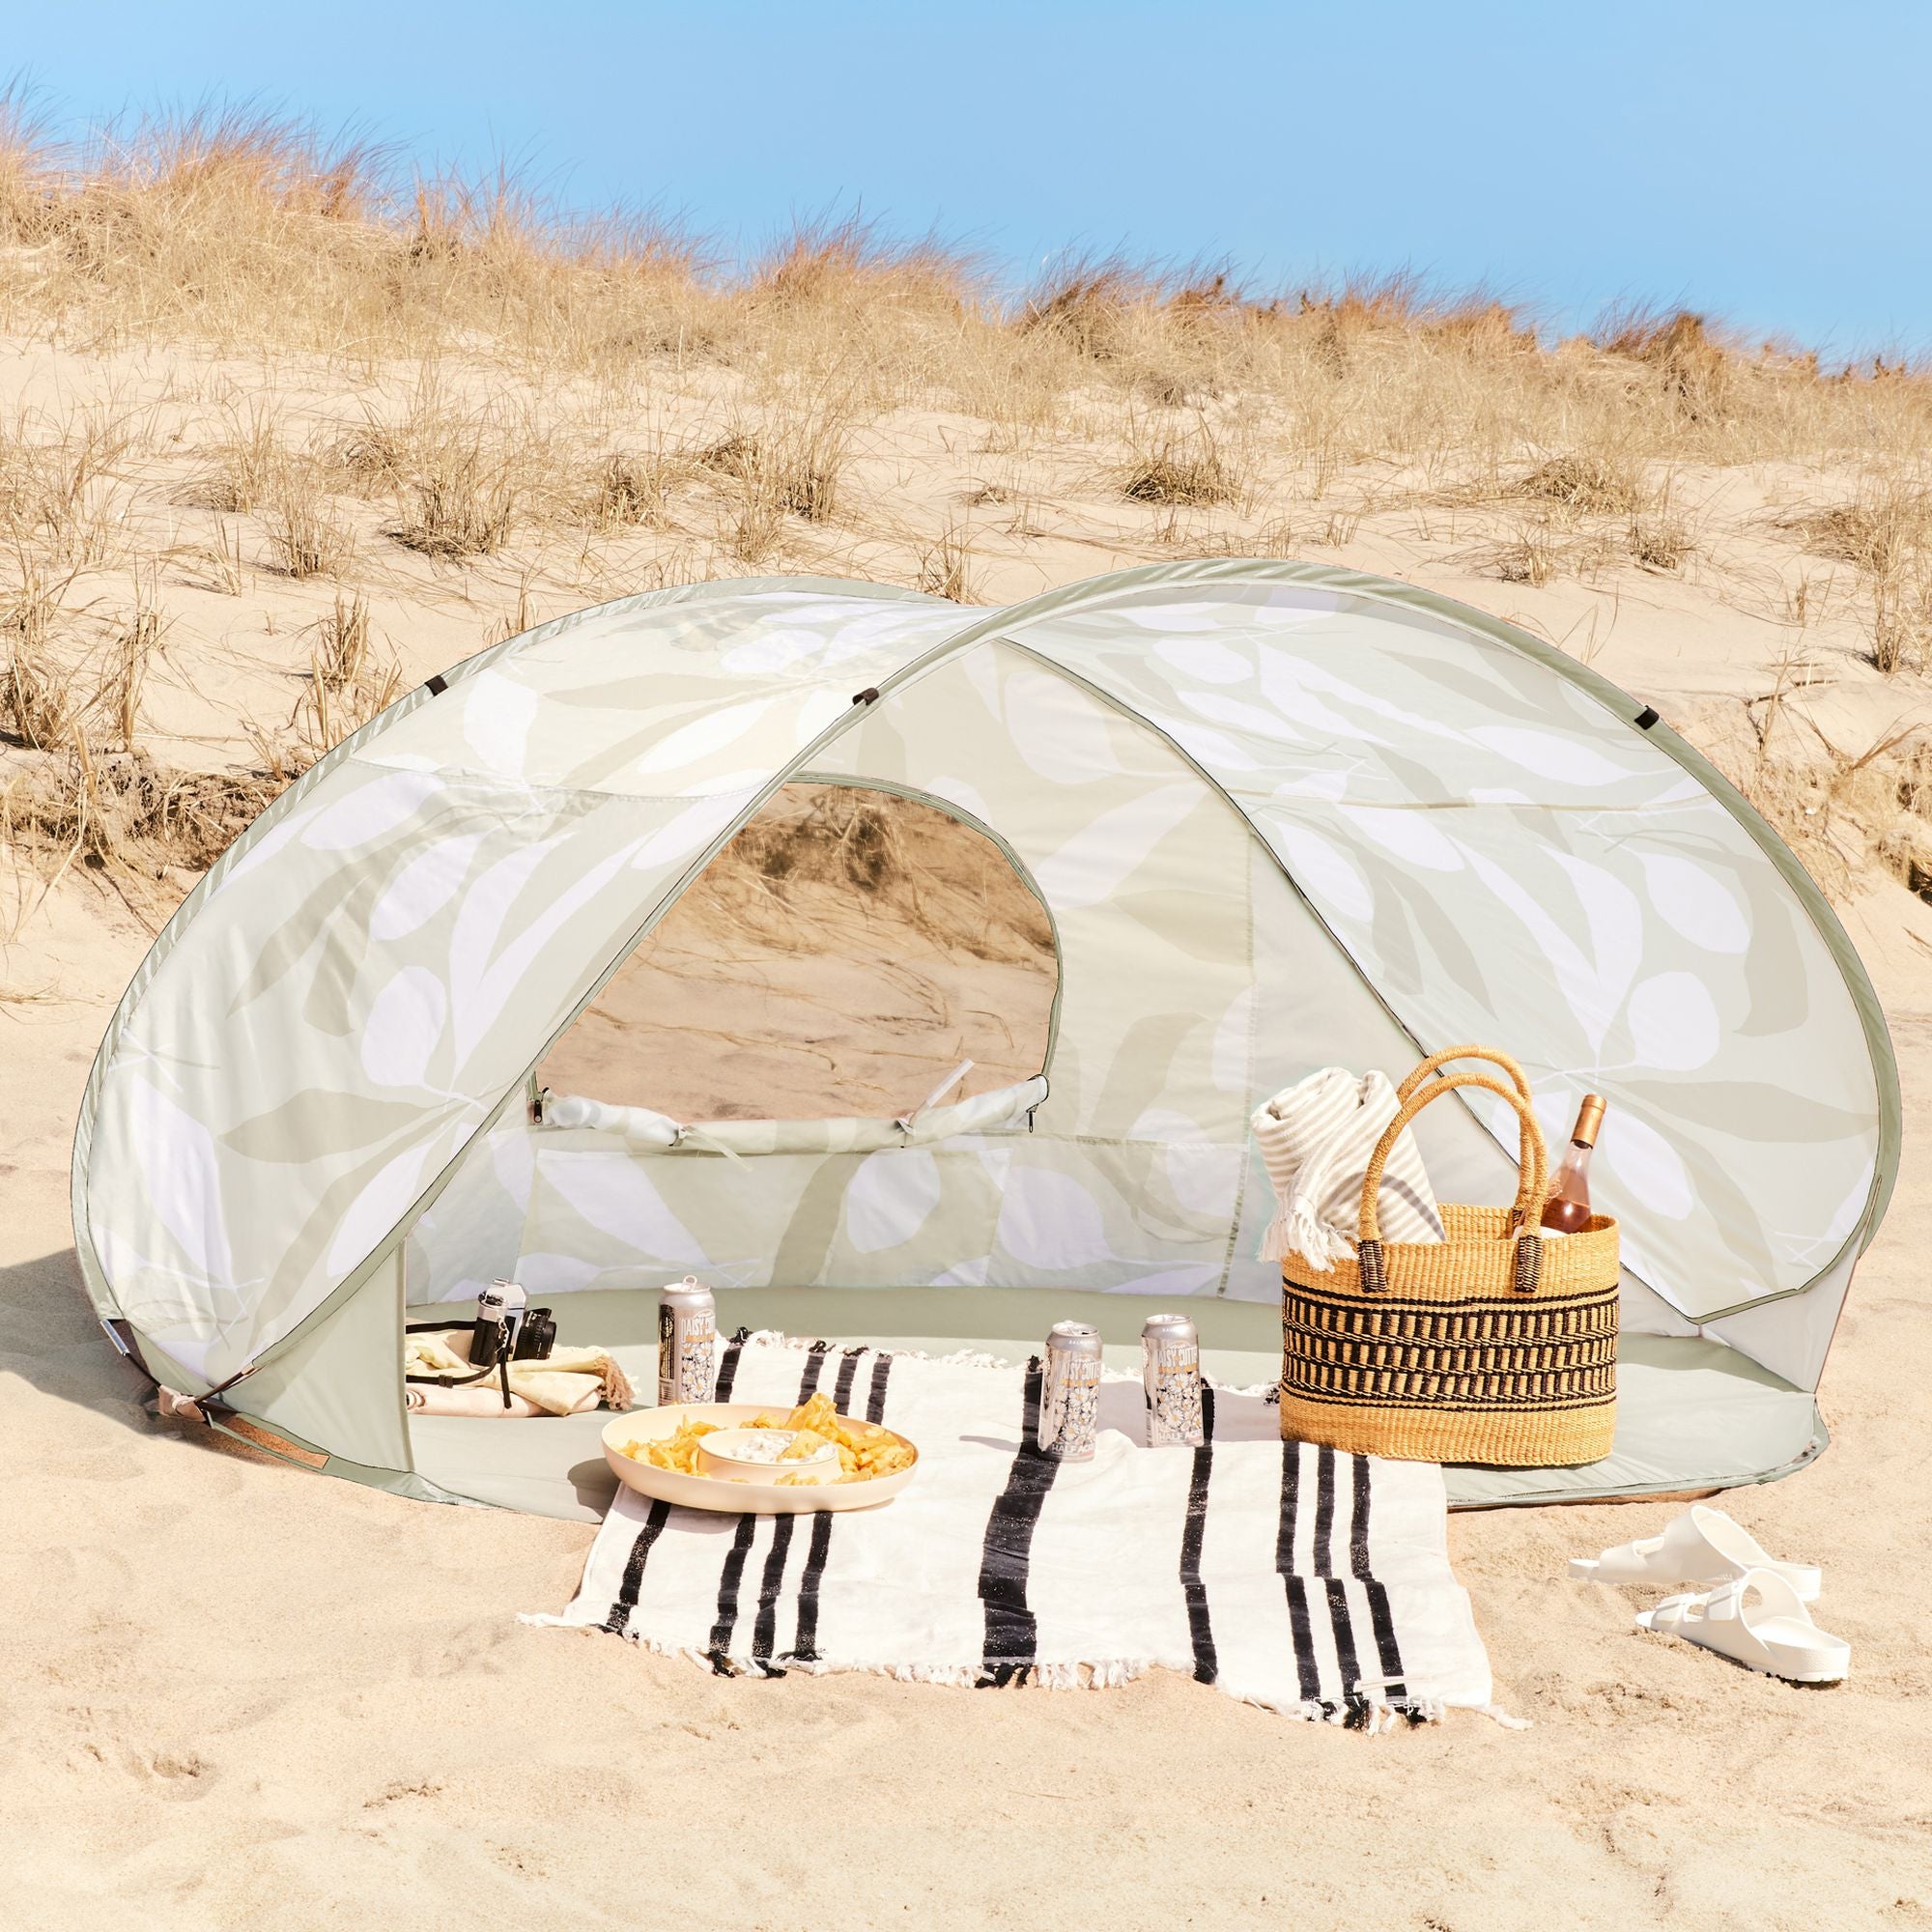 ned Jonglere Klappe 7 Best Beach Tents and Sunshades for Beach in 21